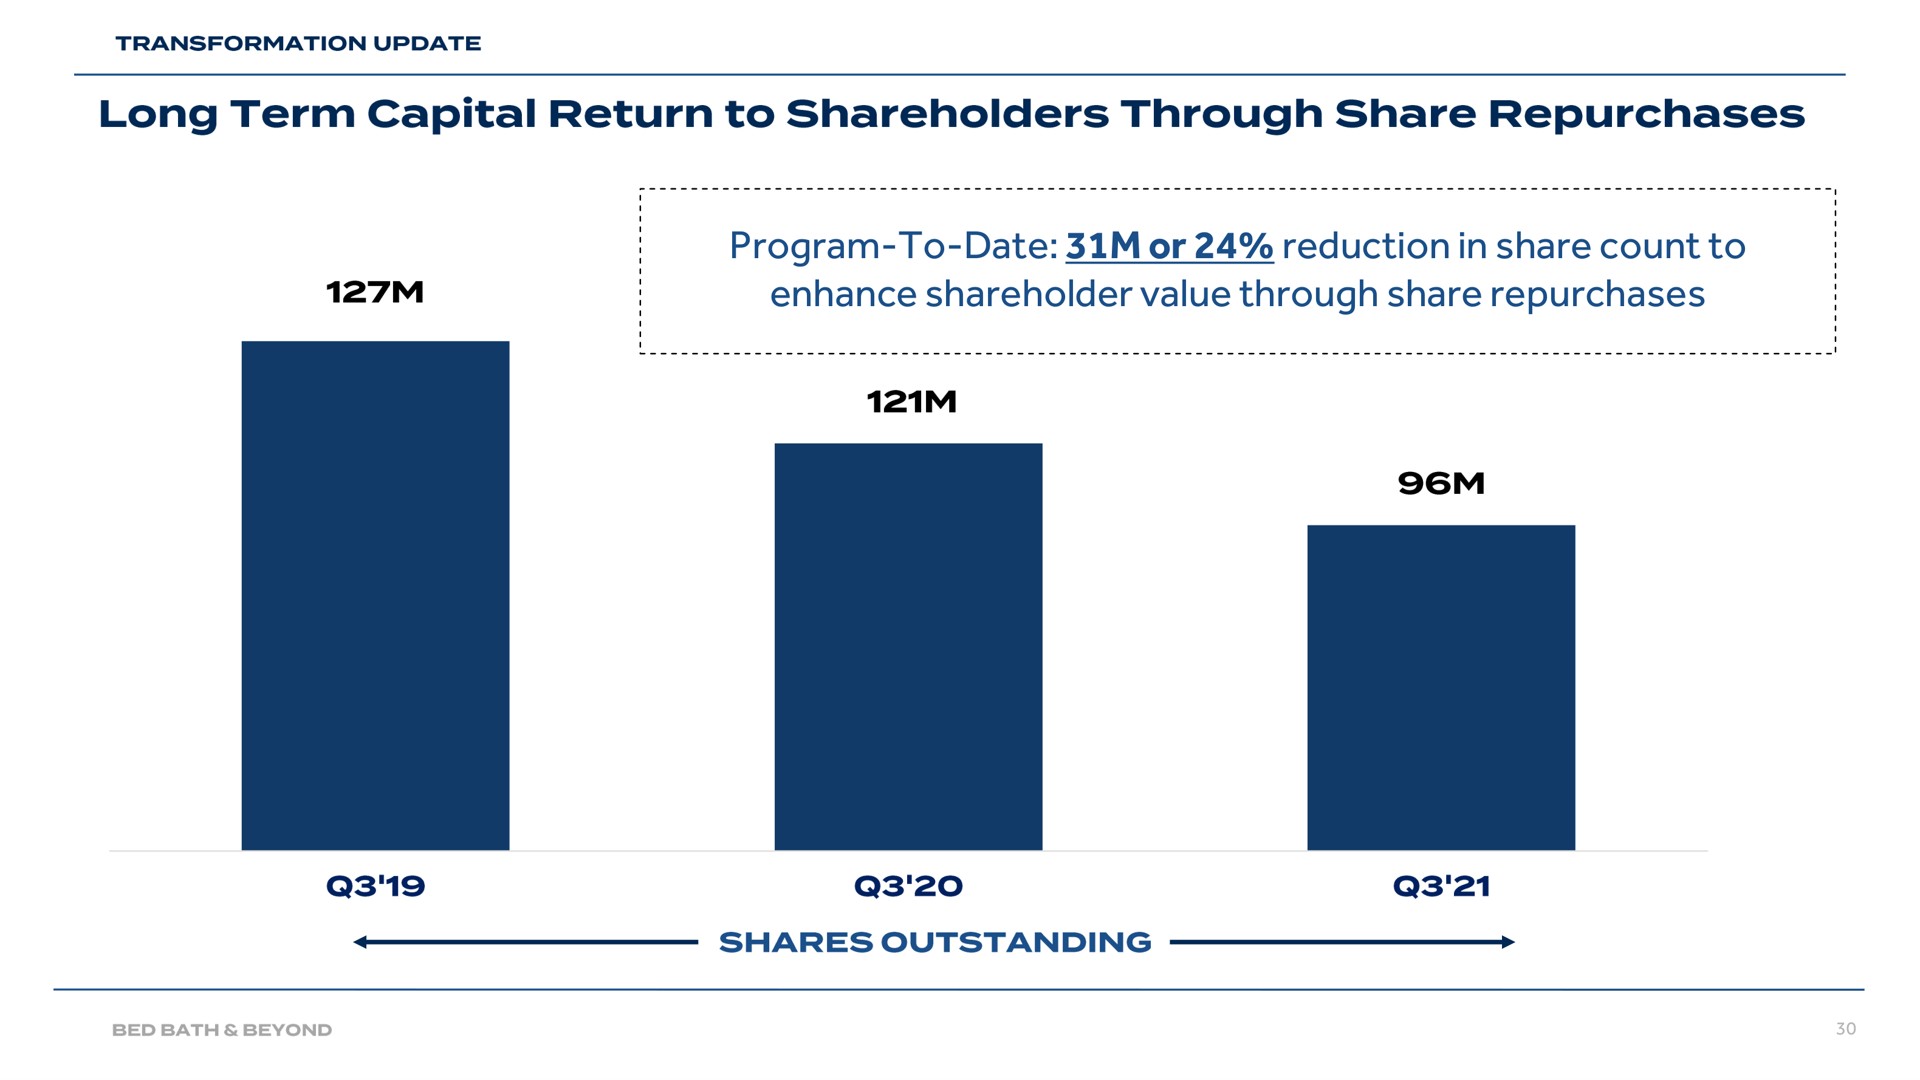 program to date or reduction in share count to enhance shareholder value through share repurchases long term capital return shareholders | Bed Bath & Beyond